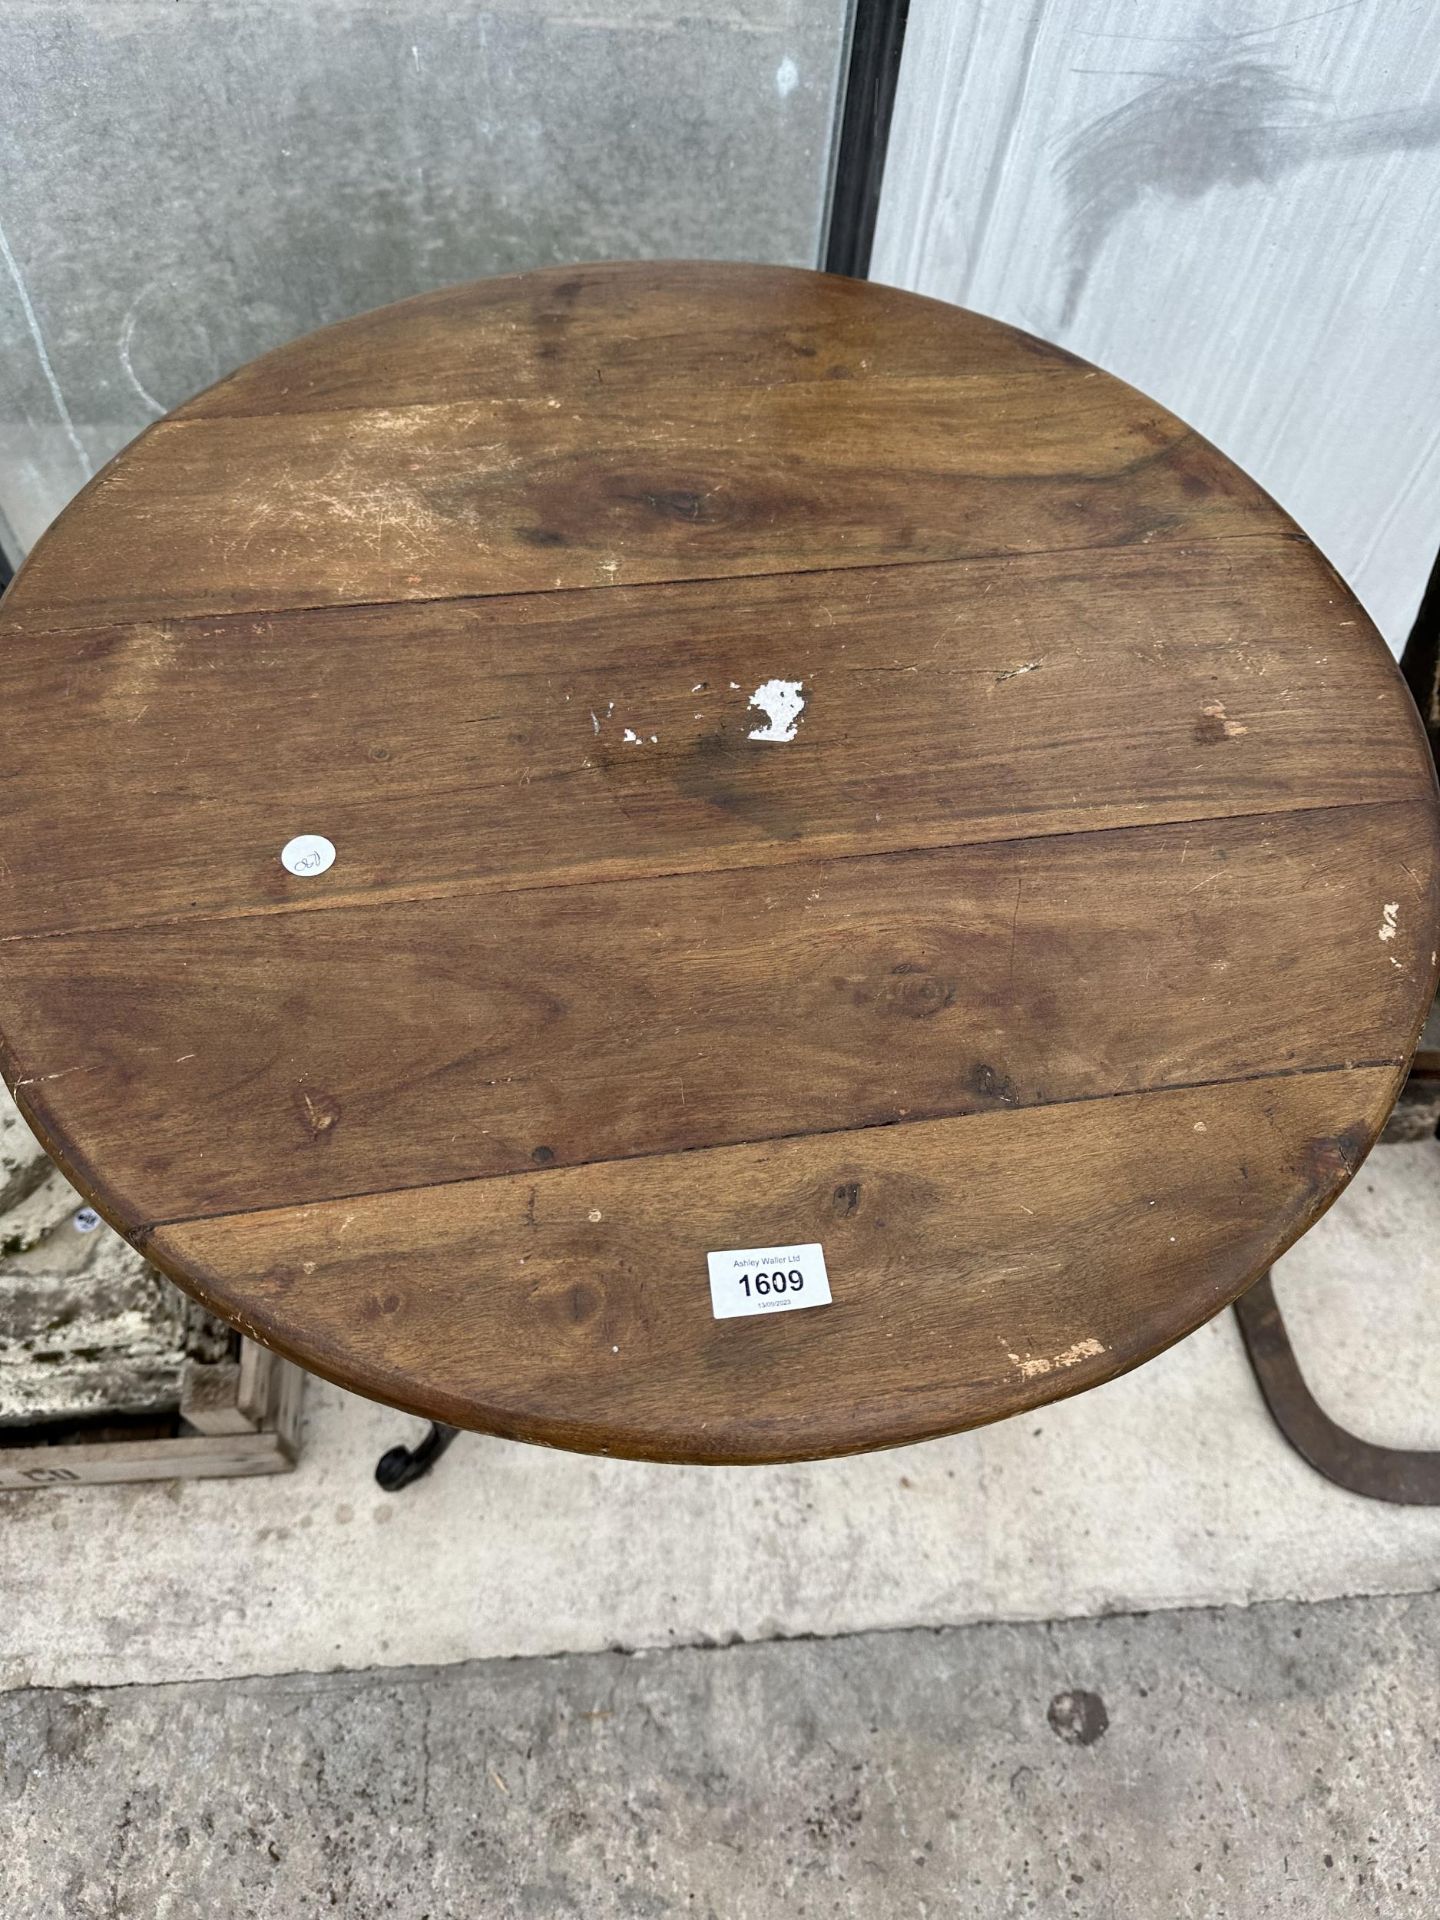 A WOODEN TOPPED BISTRO TABLE WITH HEAVY METAL LEGS - Image 2 of 3